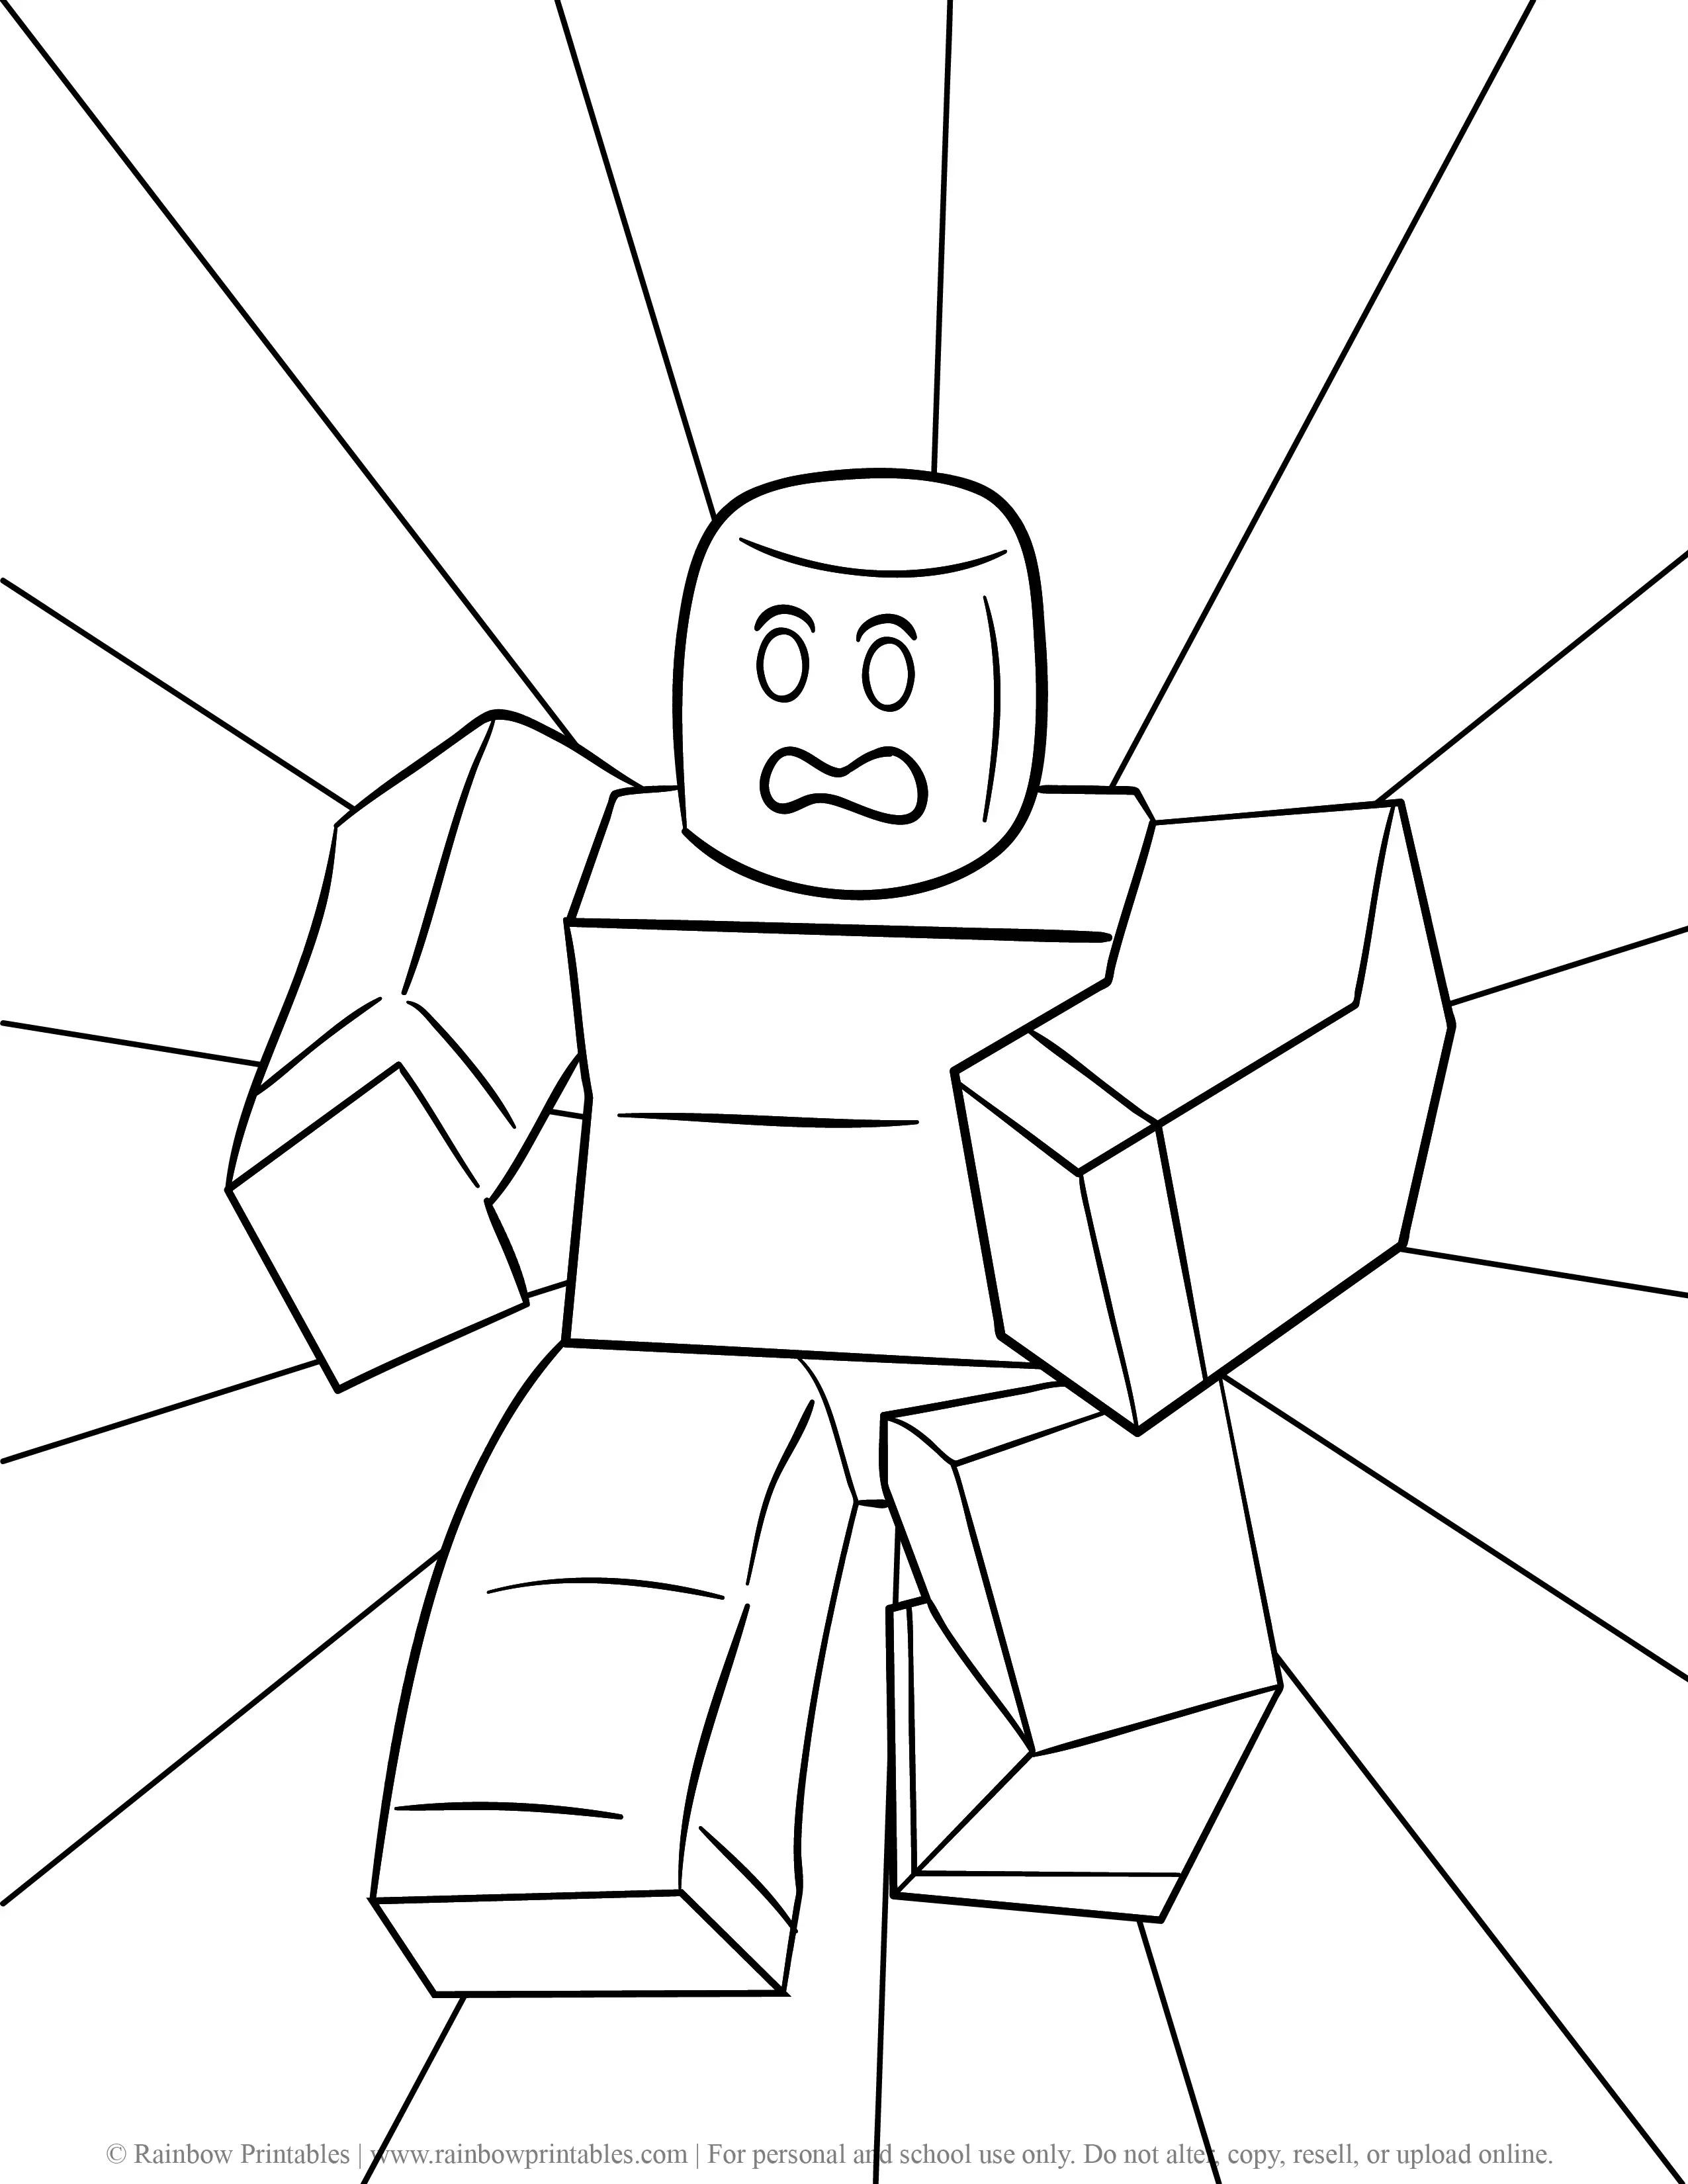 roblox coloring pages for kids video game roblox noob, game, video, robot, template, characters, avatar, drawings, for boys, aesthetic, easy, free, wallpaper, bored